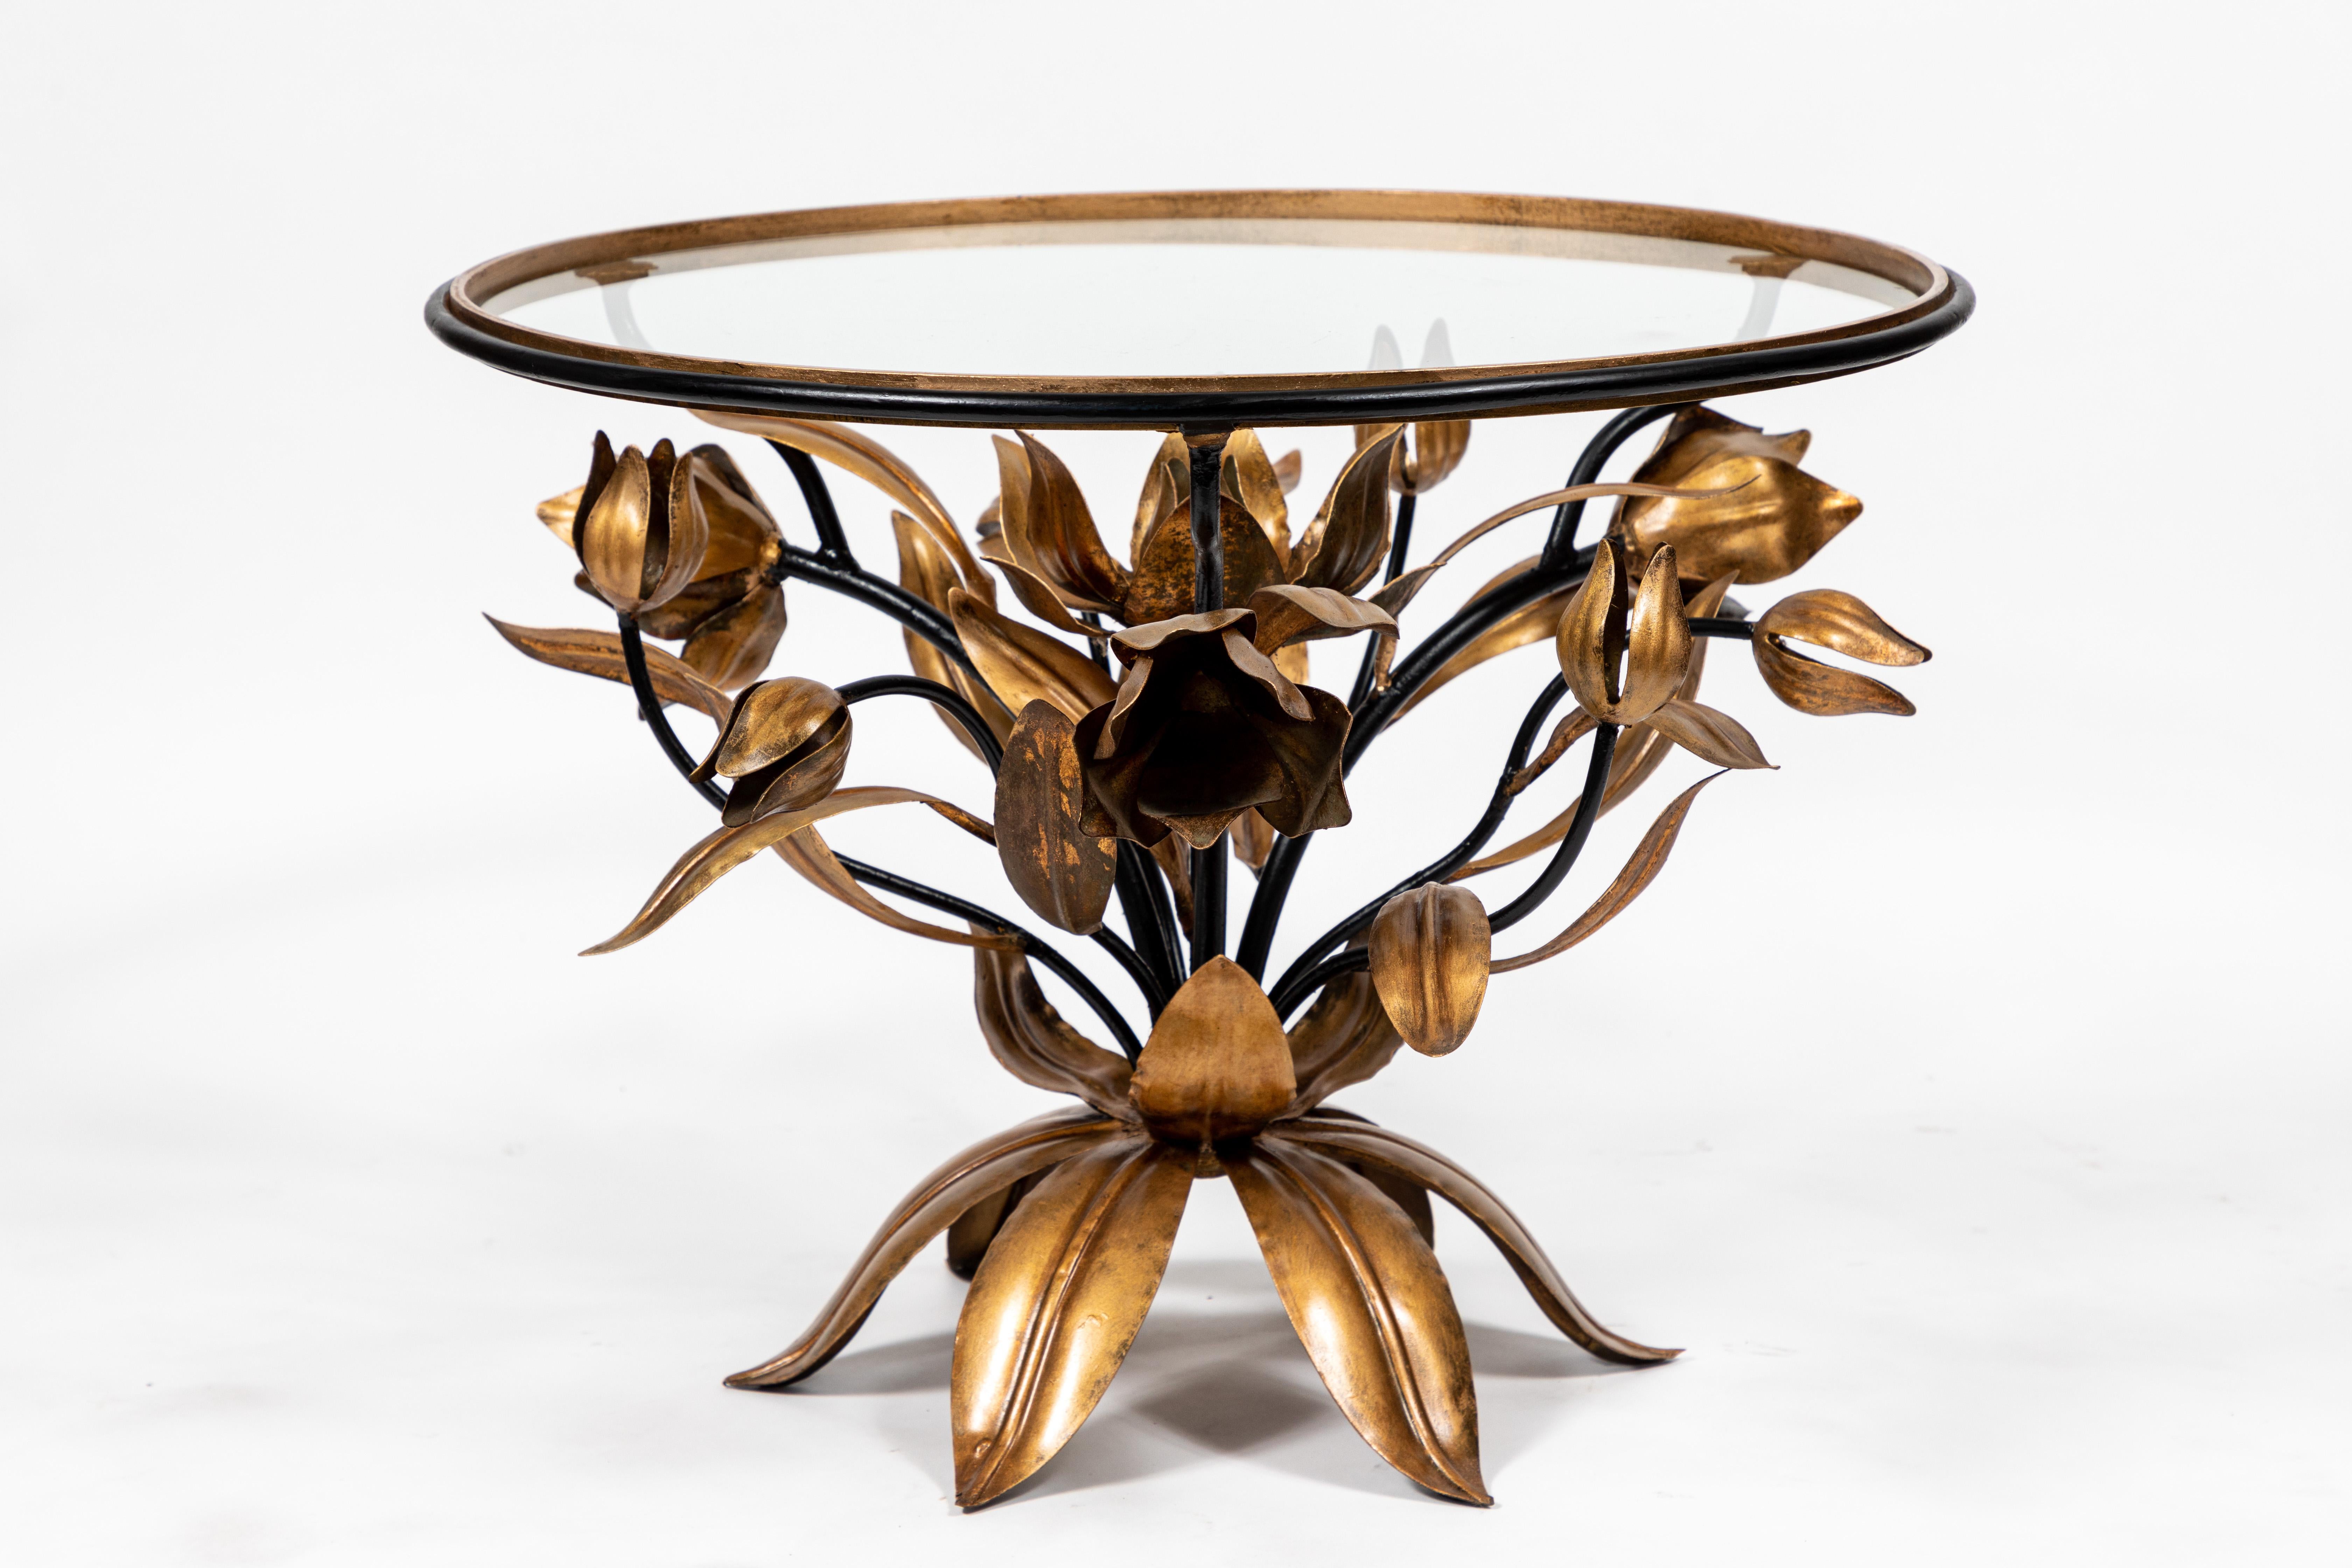 Vintage Italian round gilded gold and black painted metal tulip cocktail table with glass top.

Base is metal made up of flowers (tulips), branches and leaves with original black and gilded gold painted finish.